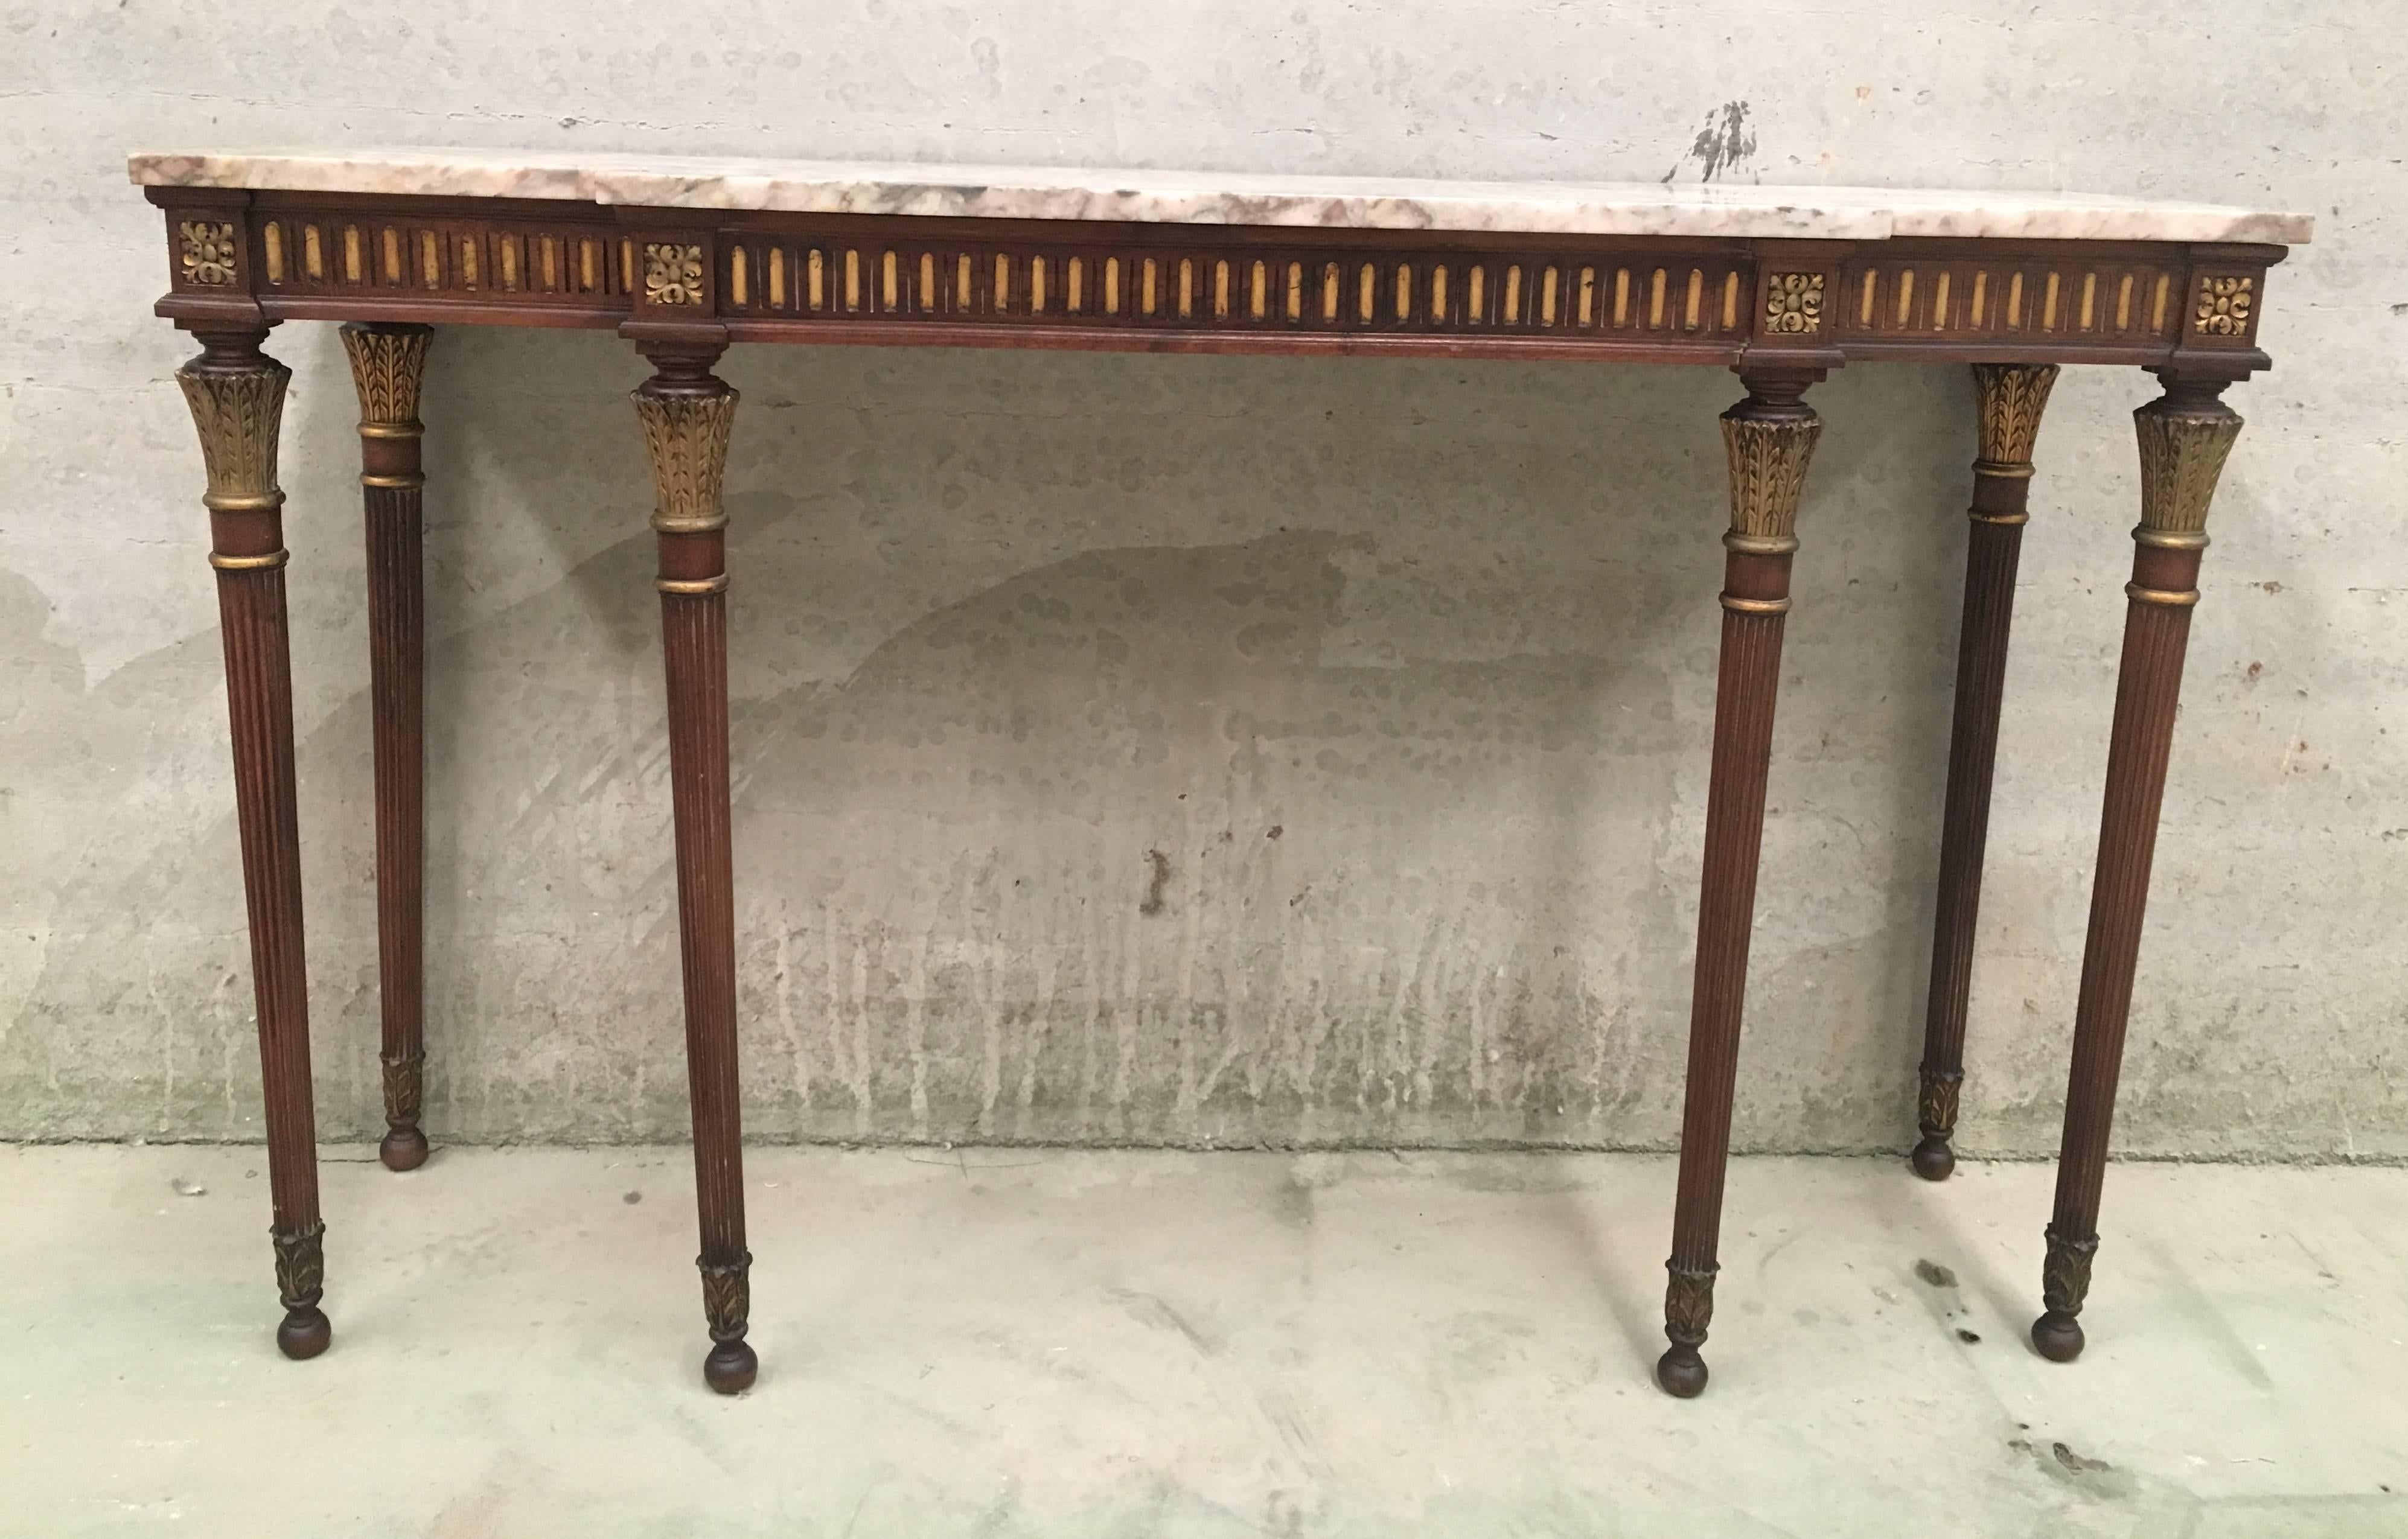 A French Louis XVI style marble and gilt painted wood console table from the mid 20th century. This French console table circa 1960 features a rectangular grey and white veined marble top over an exquisite painted body. The apron is carved with